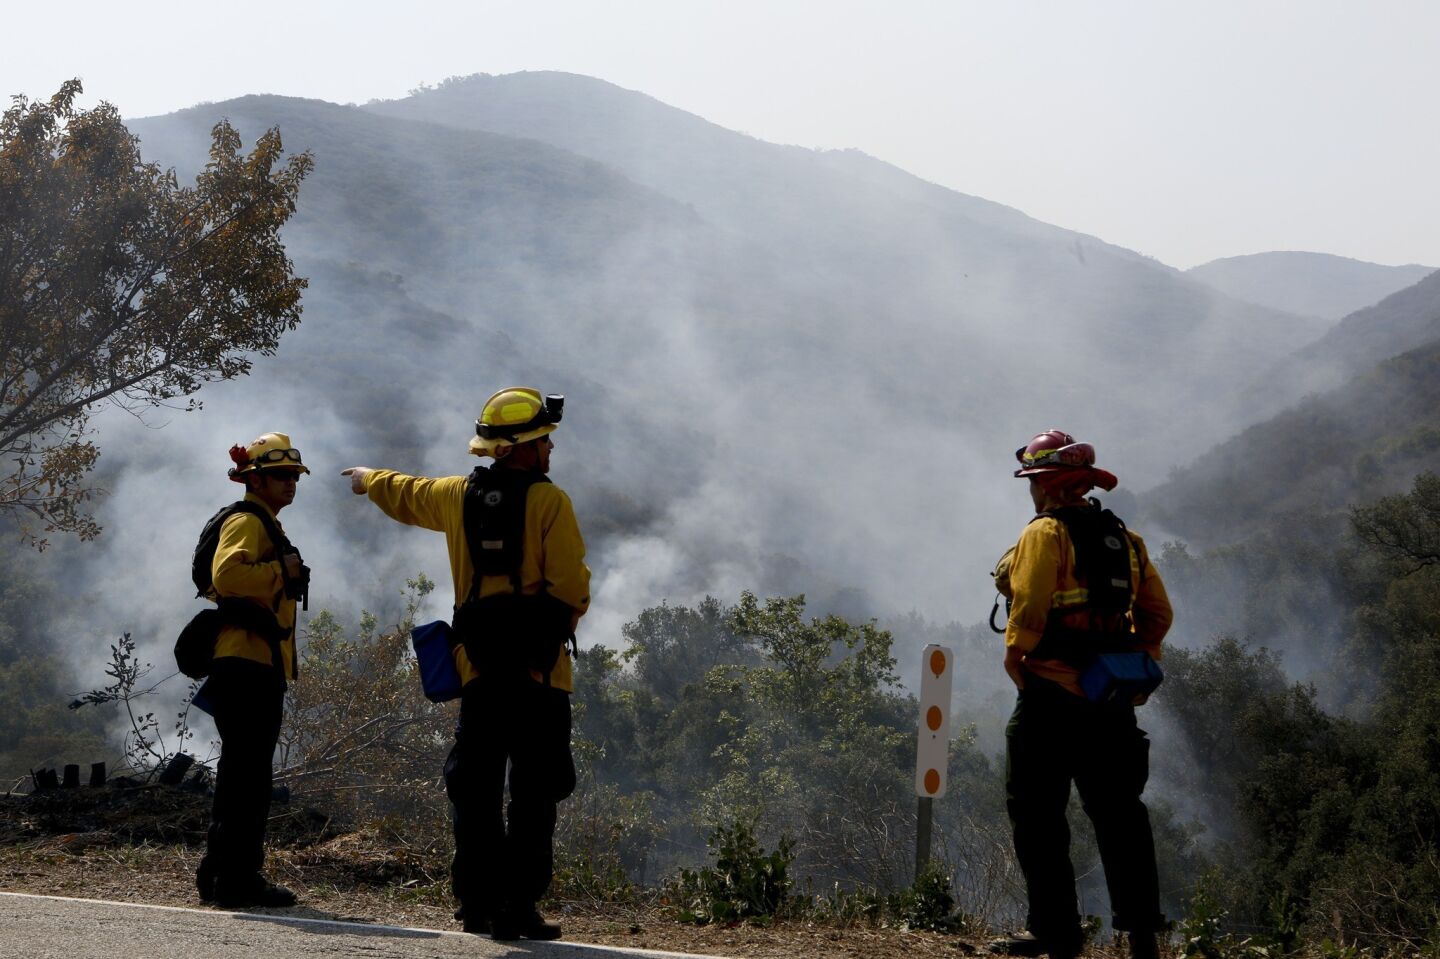 Firefighters keep an eye on a smoldering area along Potrero Road in Newbury Park where crews lit back fires last night to prevent further spread of the Springs fire.